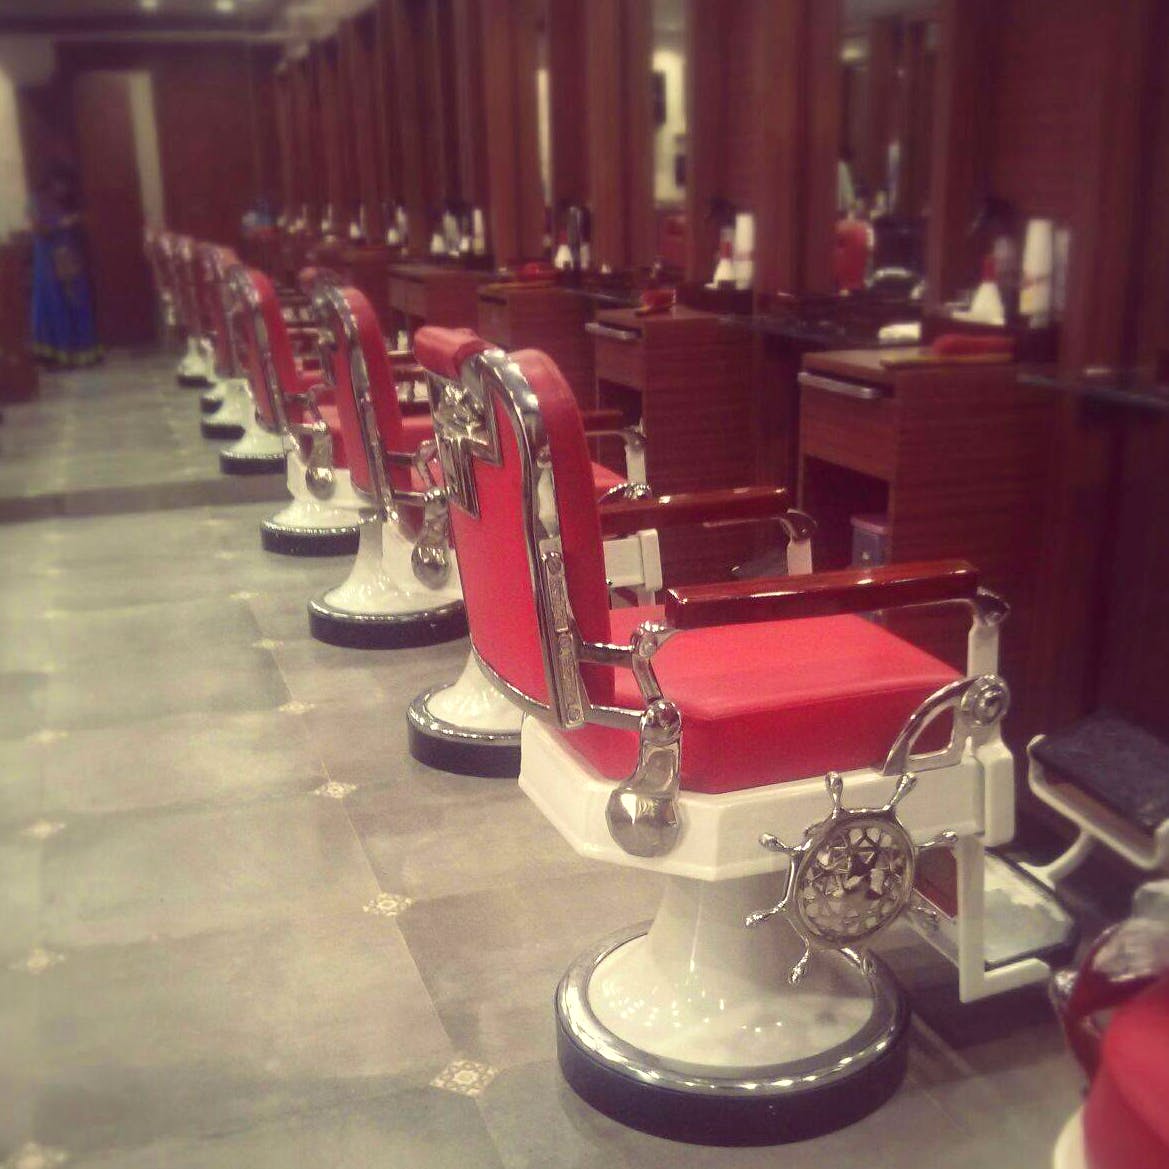 Red,Barber chair,Chair,Furniture,Floor,Material property,Machine,Room,Architecture,Table